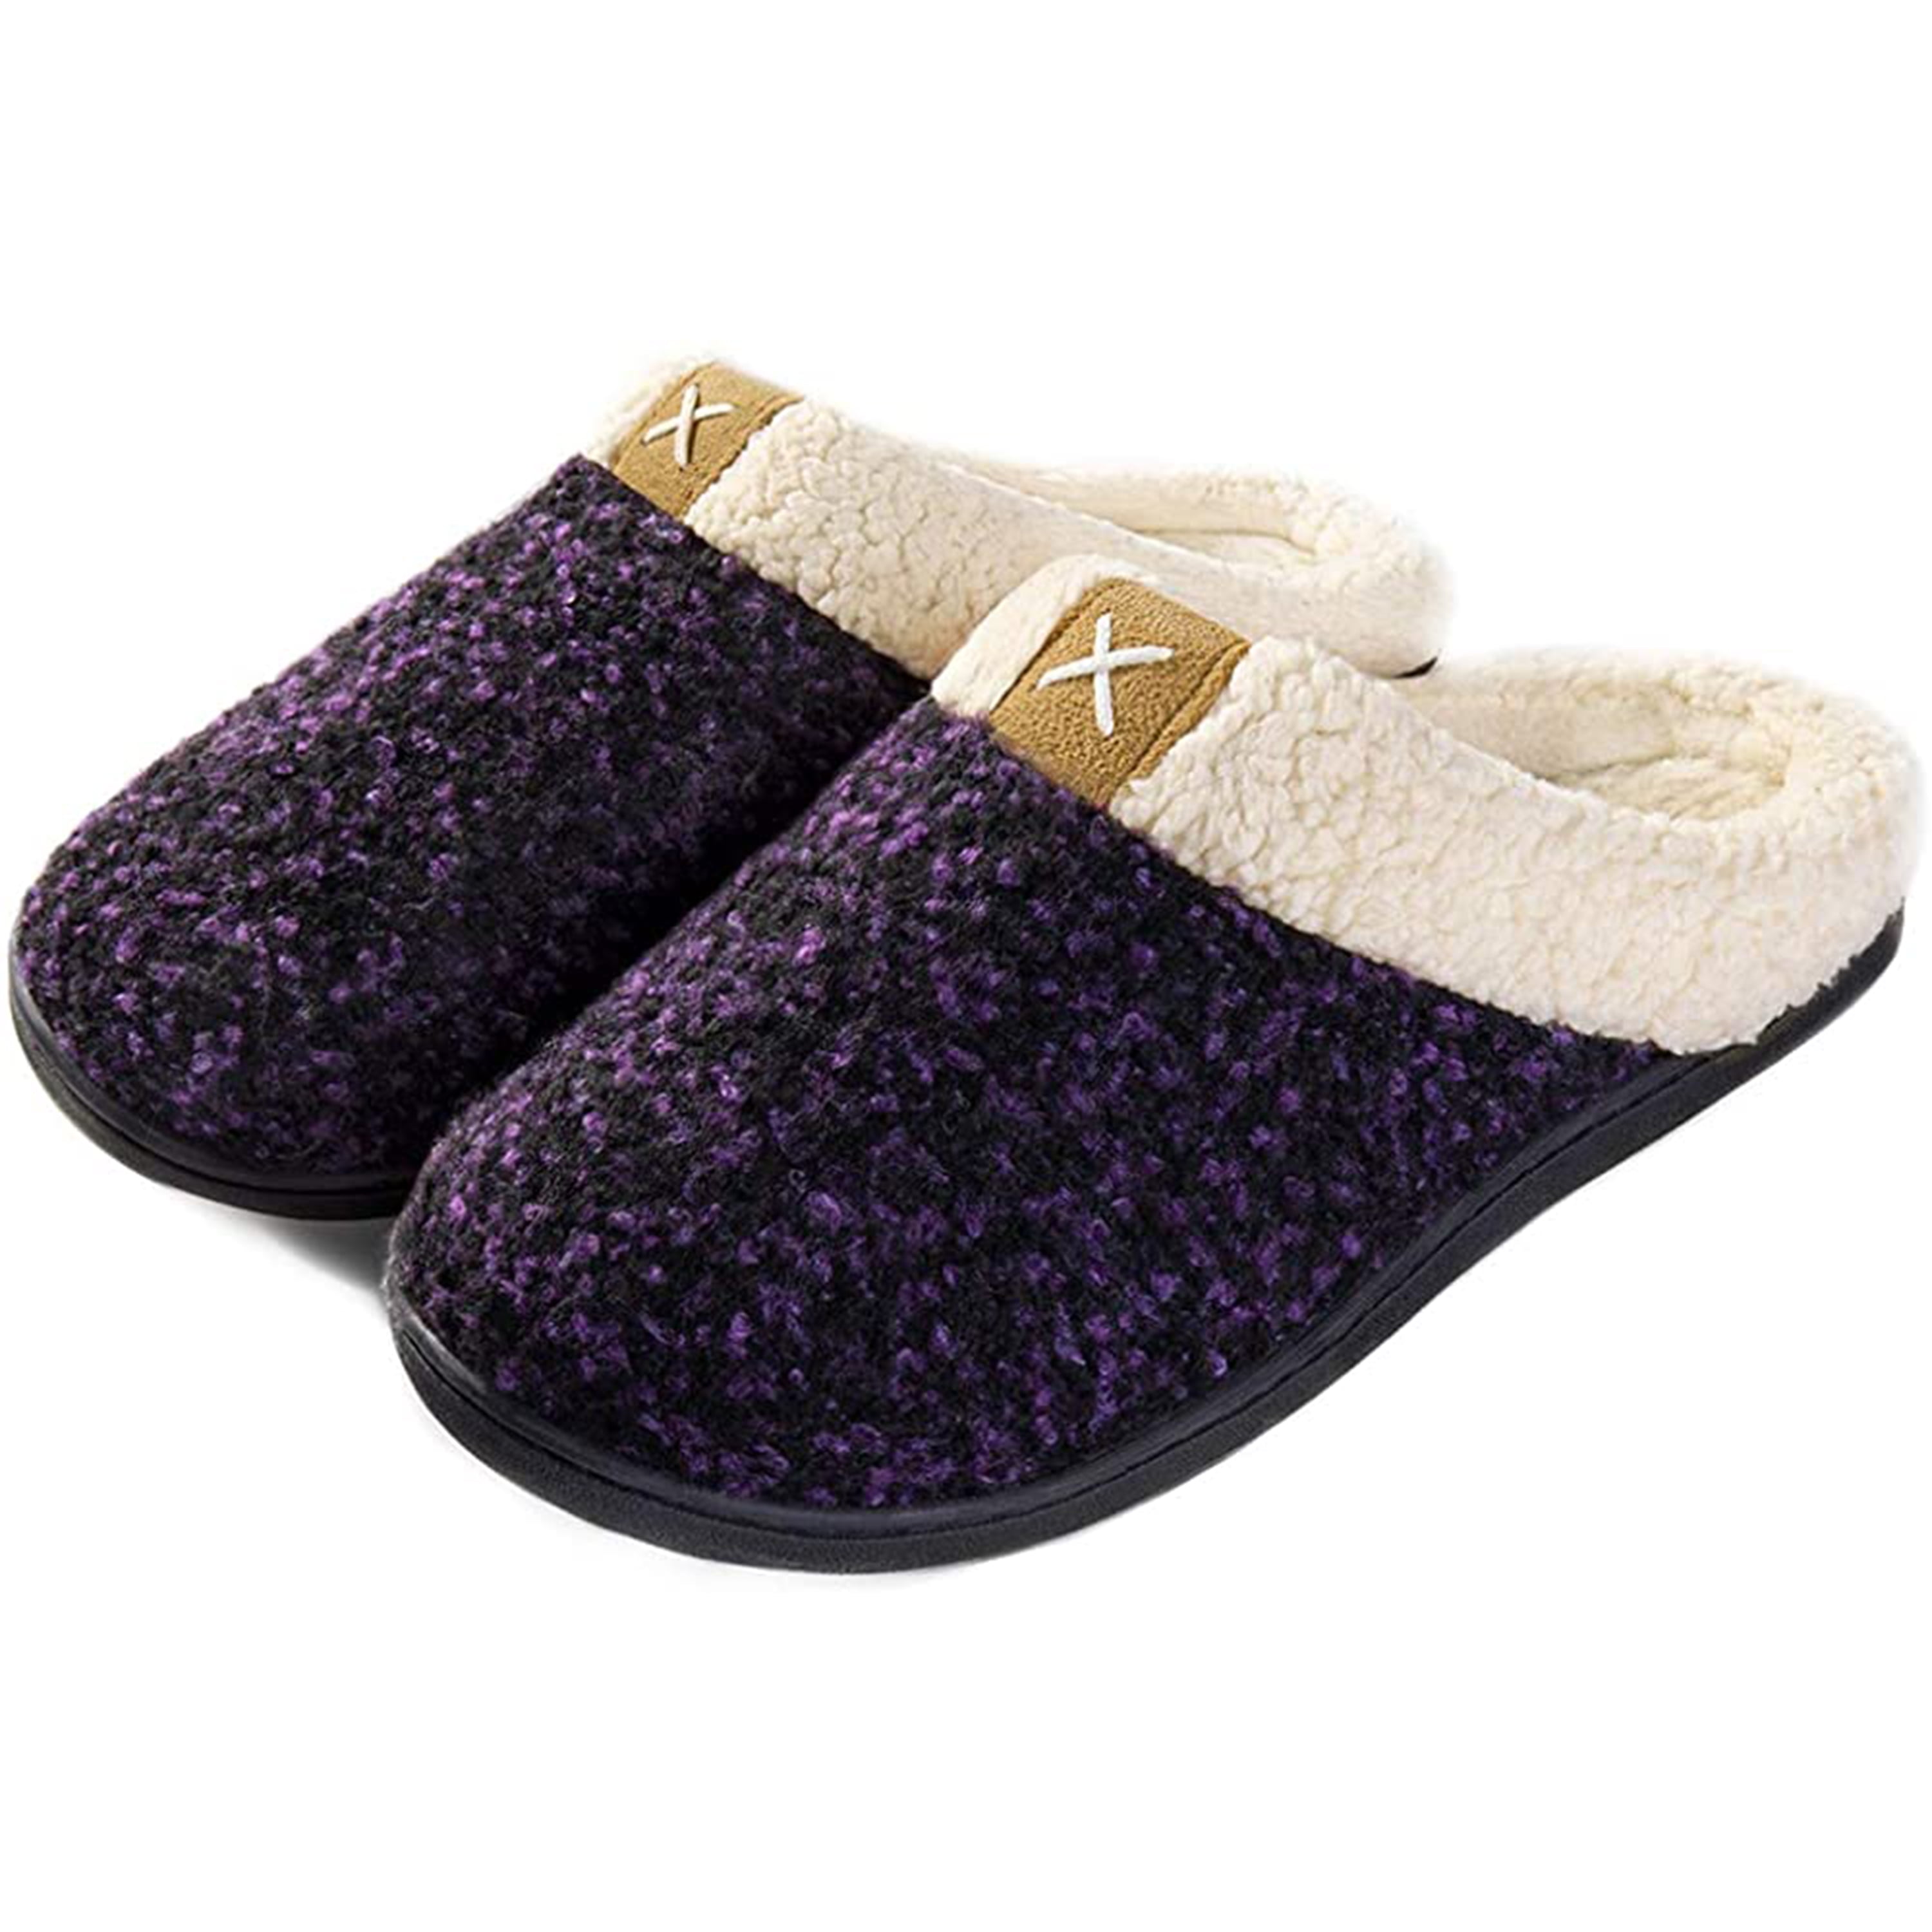 Womens Fur Lined Slippers Ladies Winter Mules Non Slip Rubber Sole Snug Shoes 